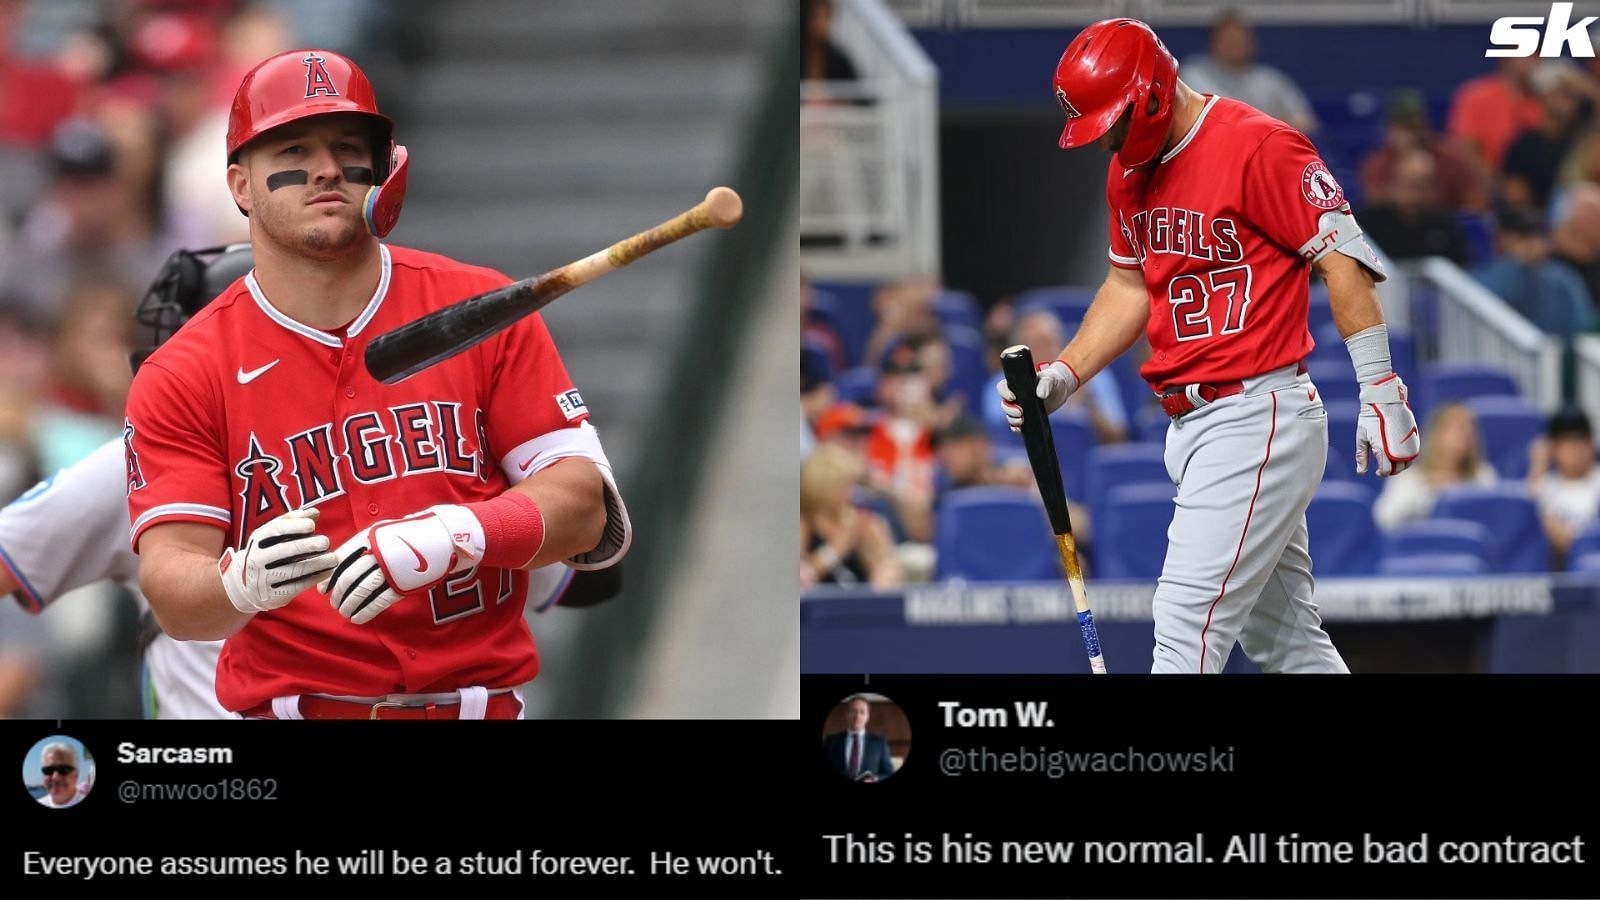 Los Angeles Angels fans getting antsy about Mike Trout&rsquo;s prolonged slump